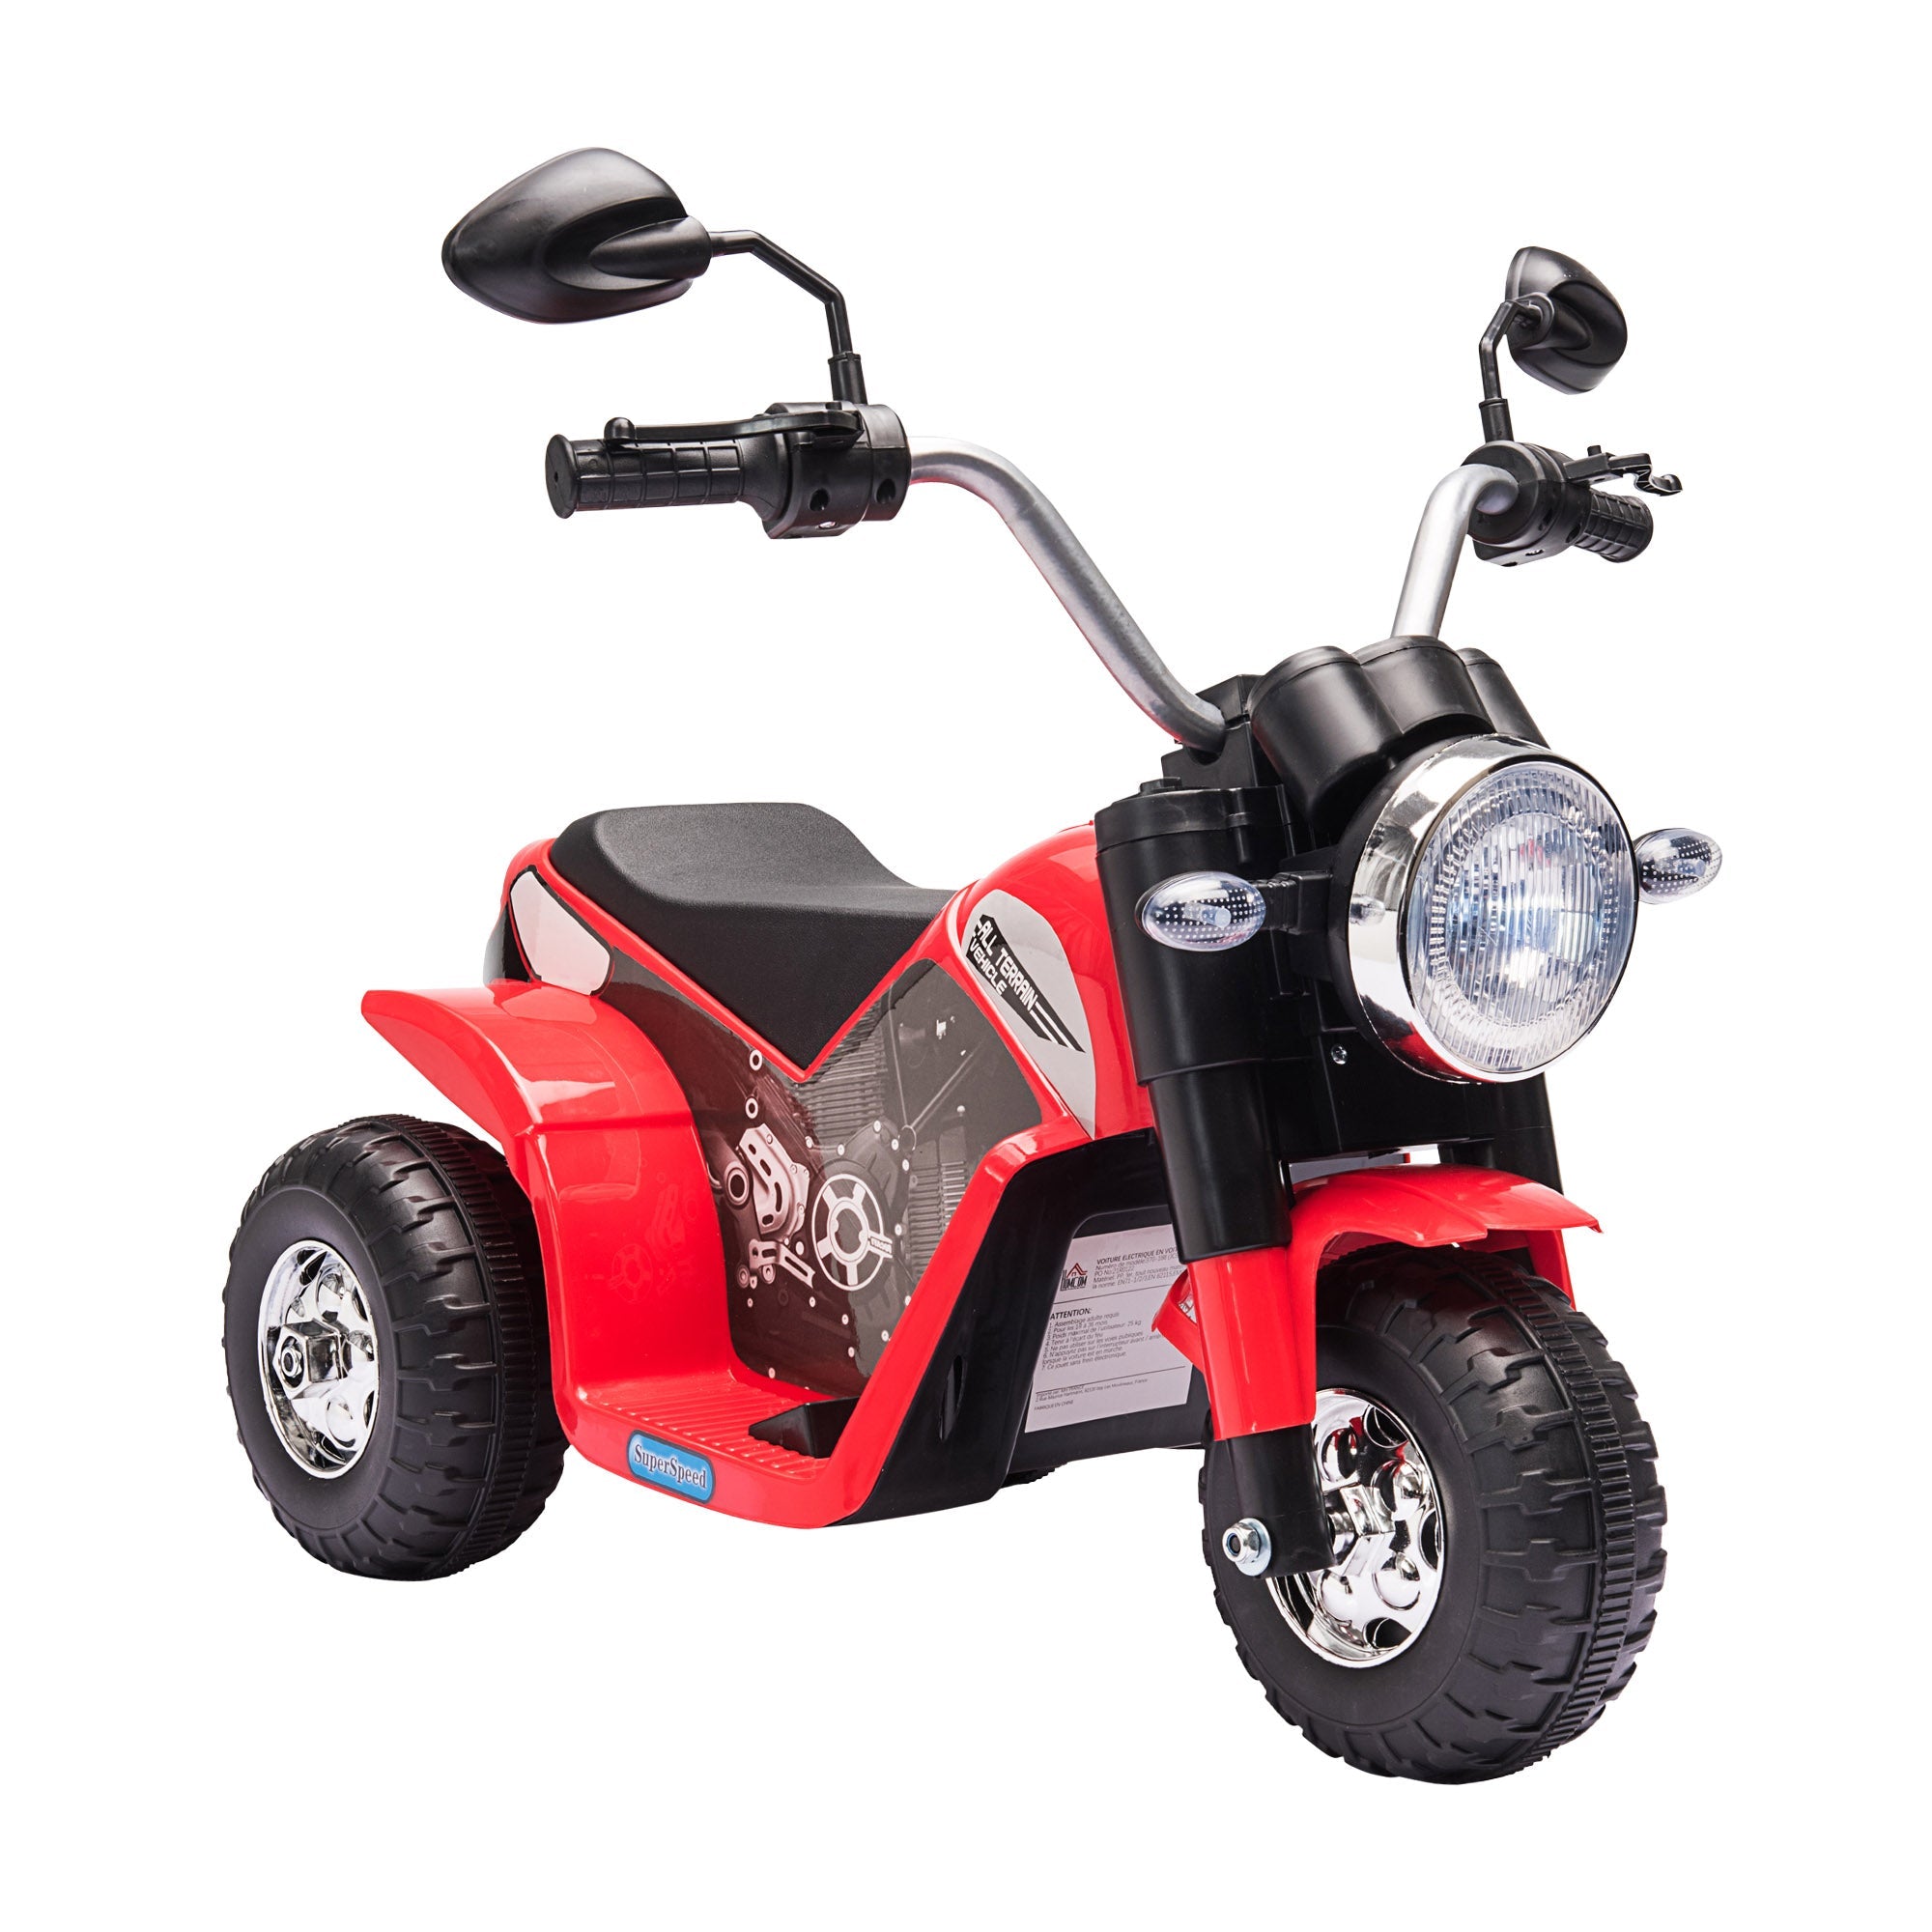 Kids Electric Motorcycle Ride-On Toy 3-Wheels Battery Powered Motorbike Rechargeable 6V with Horn Headlights Motorbike for 18 - 36 Months Red-0